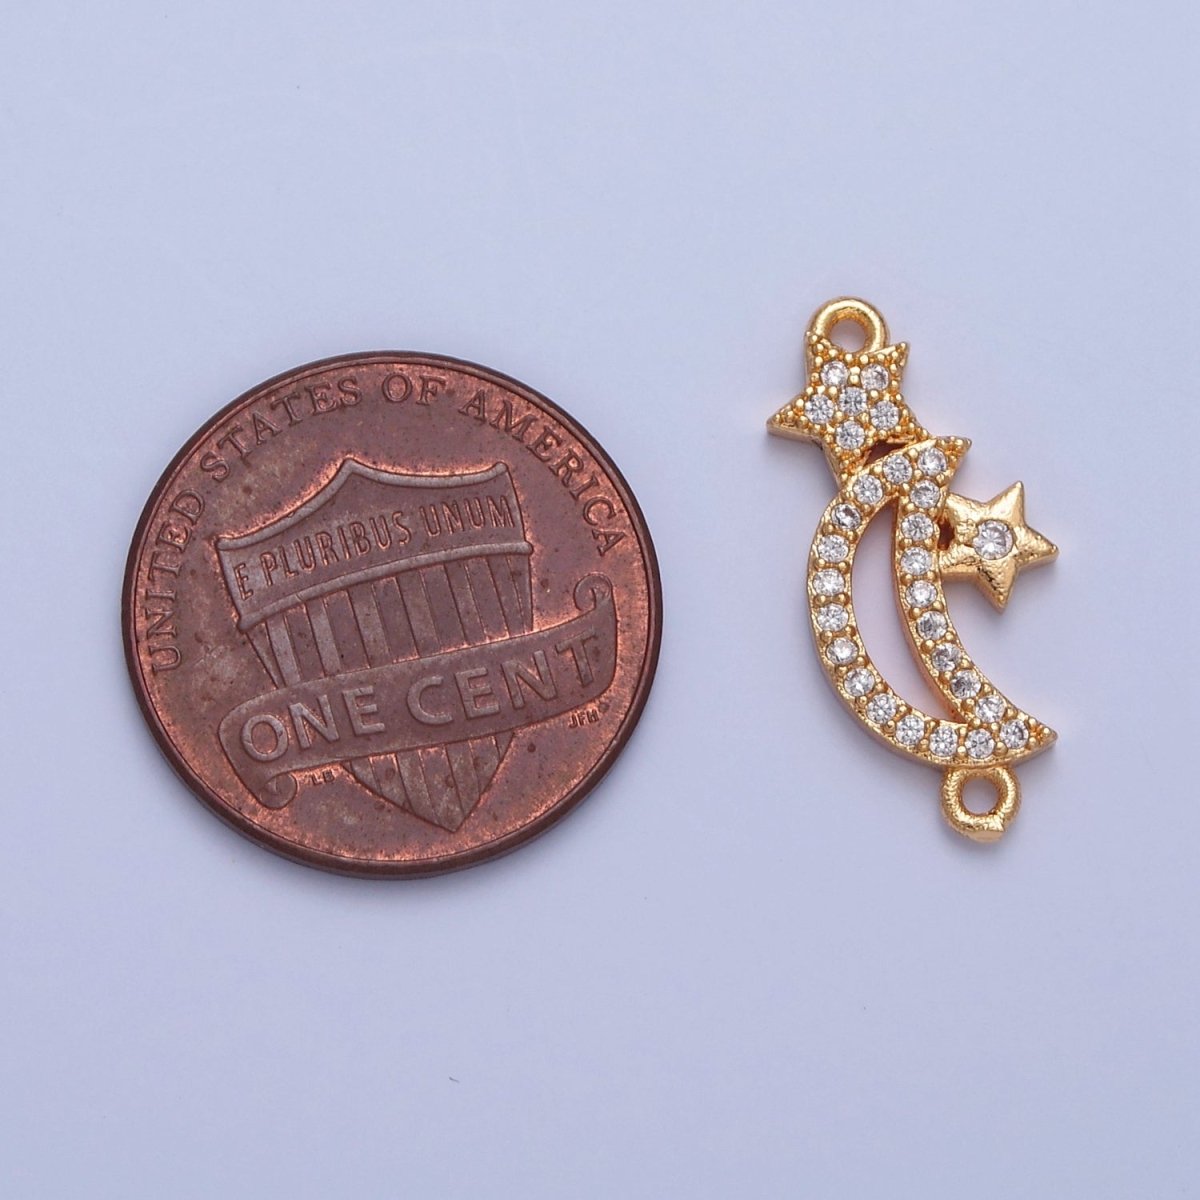 Dainty Crescent Moon Star CZ Gold Pave Charm Connector for Bracelet Necklace Supply F-556 - DLUXCA